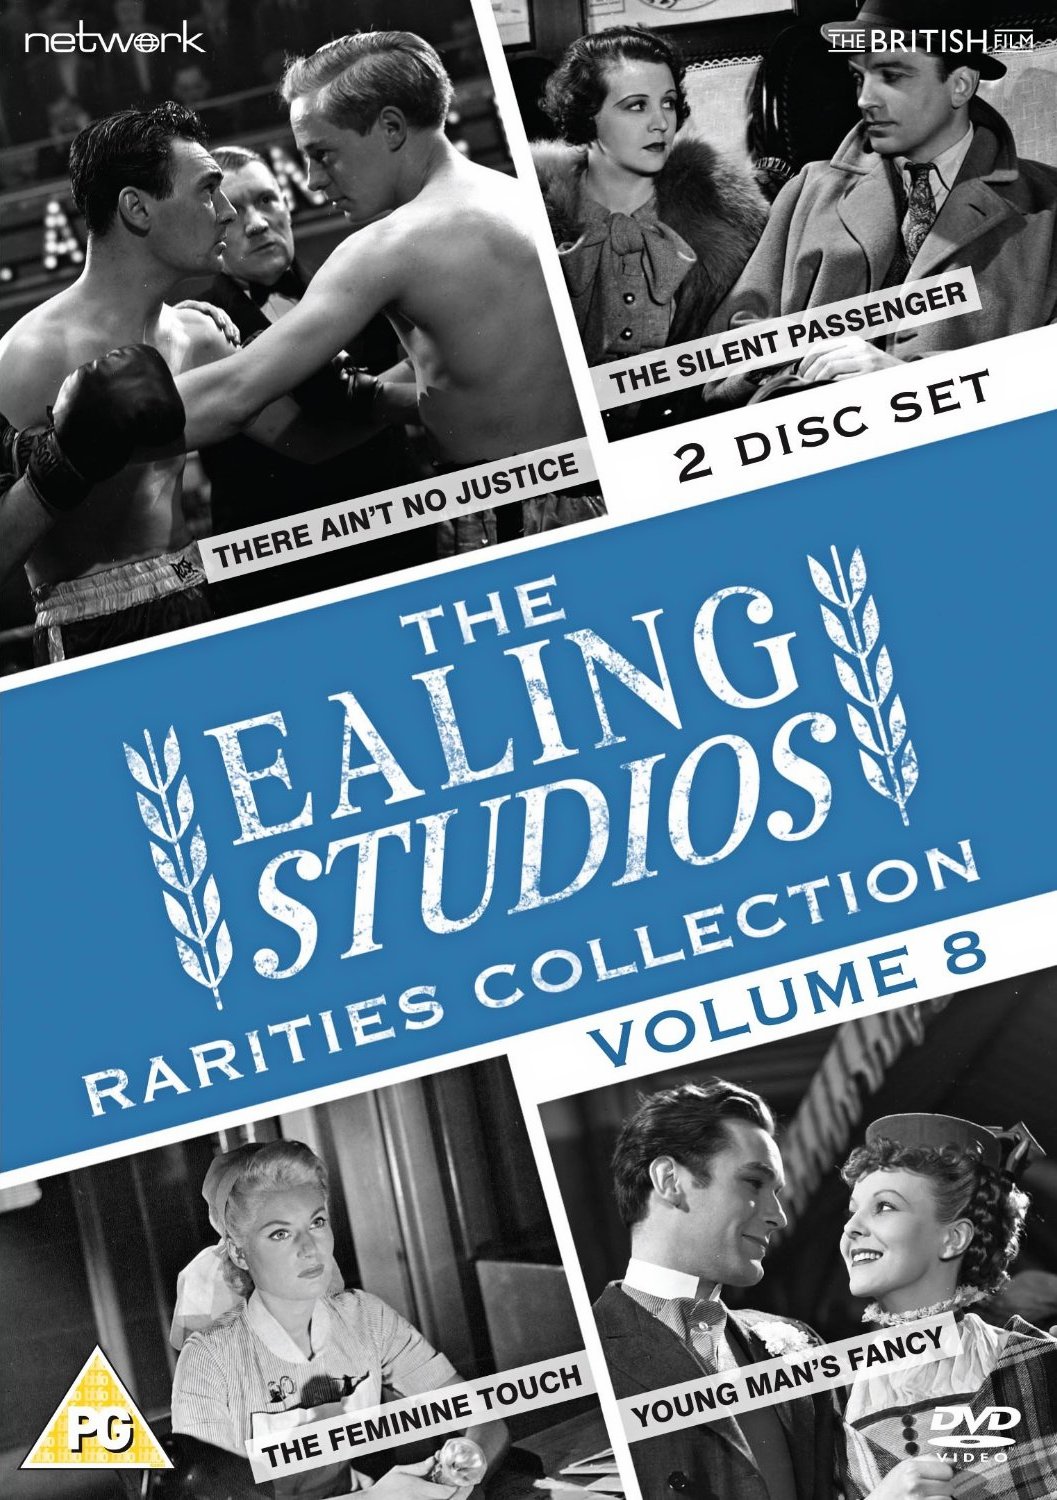 The Ealing Studios Rarities Collection DVD – Volume 8 from Network as part of the British Film collection.  Features There Ain’t No Justice, The Silent Passenger, The Feminine Touch, Young Man’s Fancy.